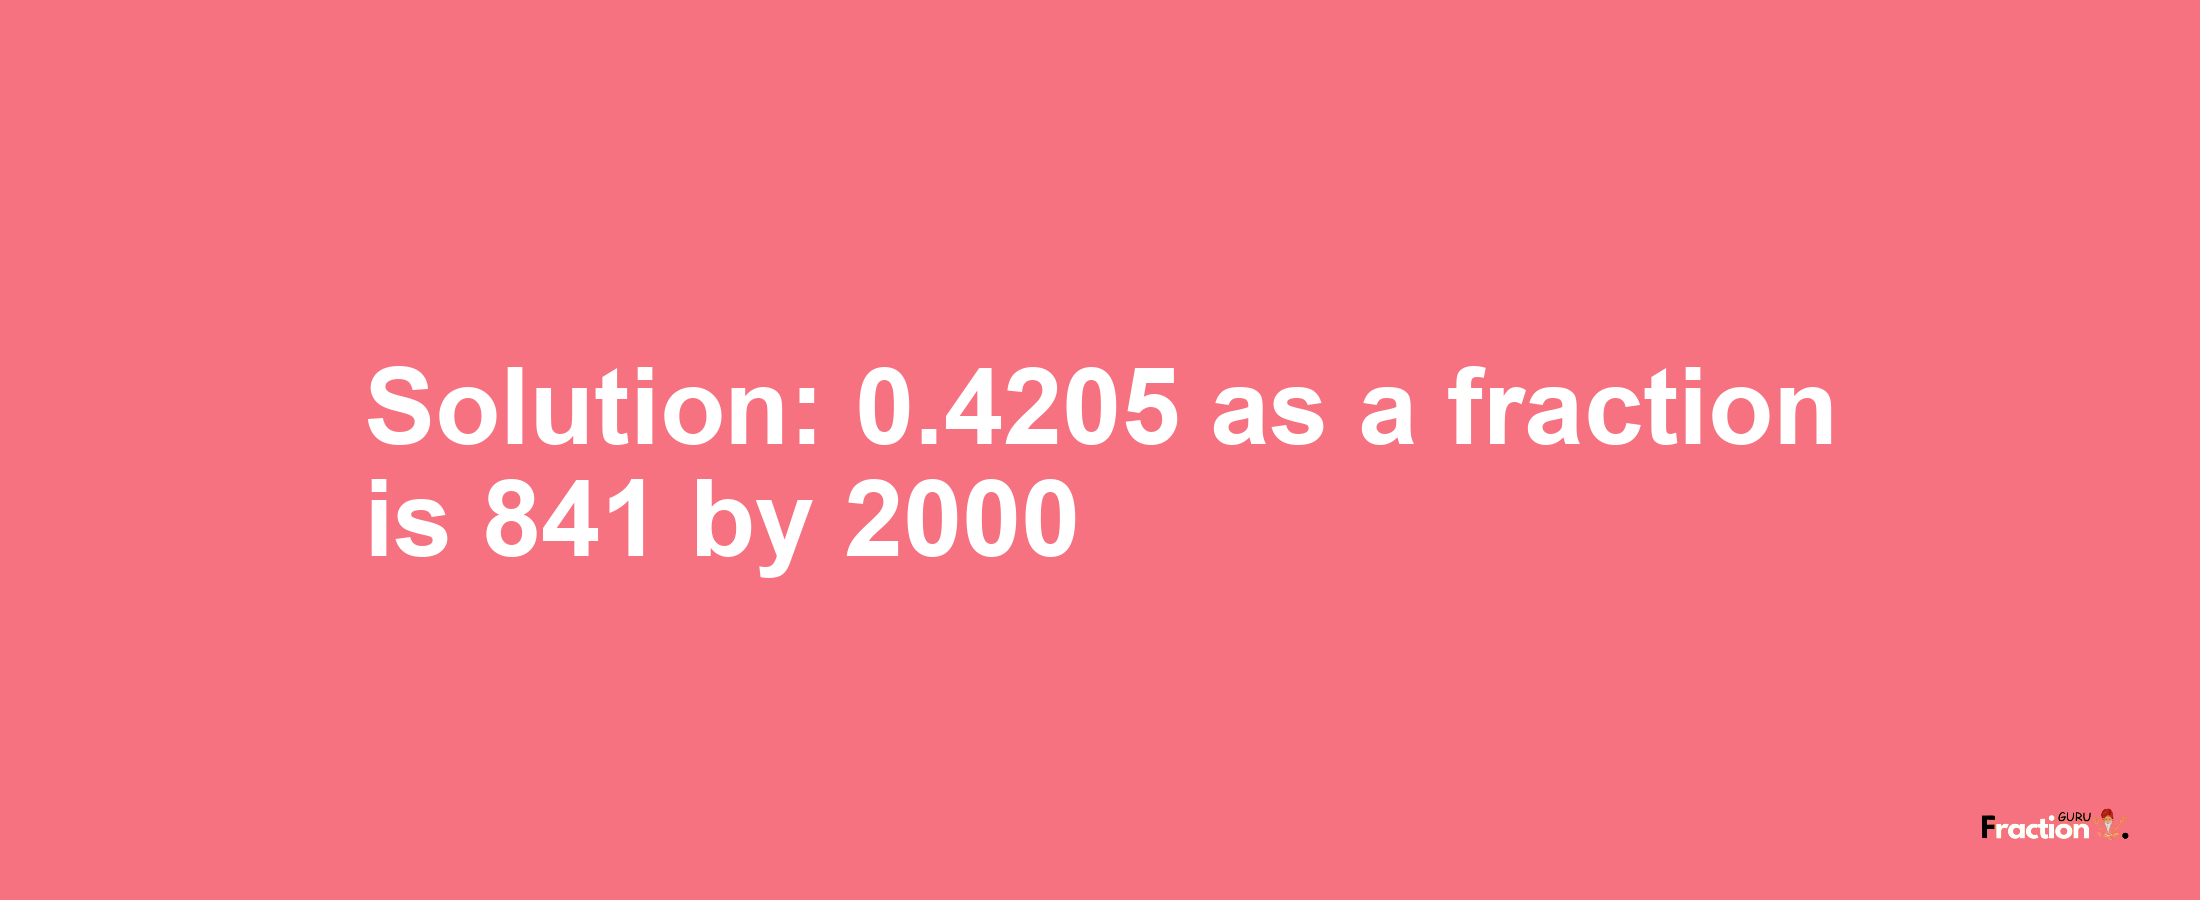 Solution:0.4205 as a fraction is 841/2000